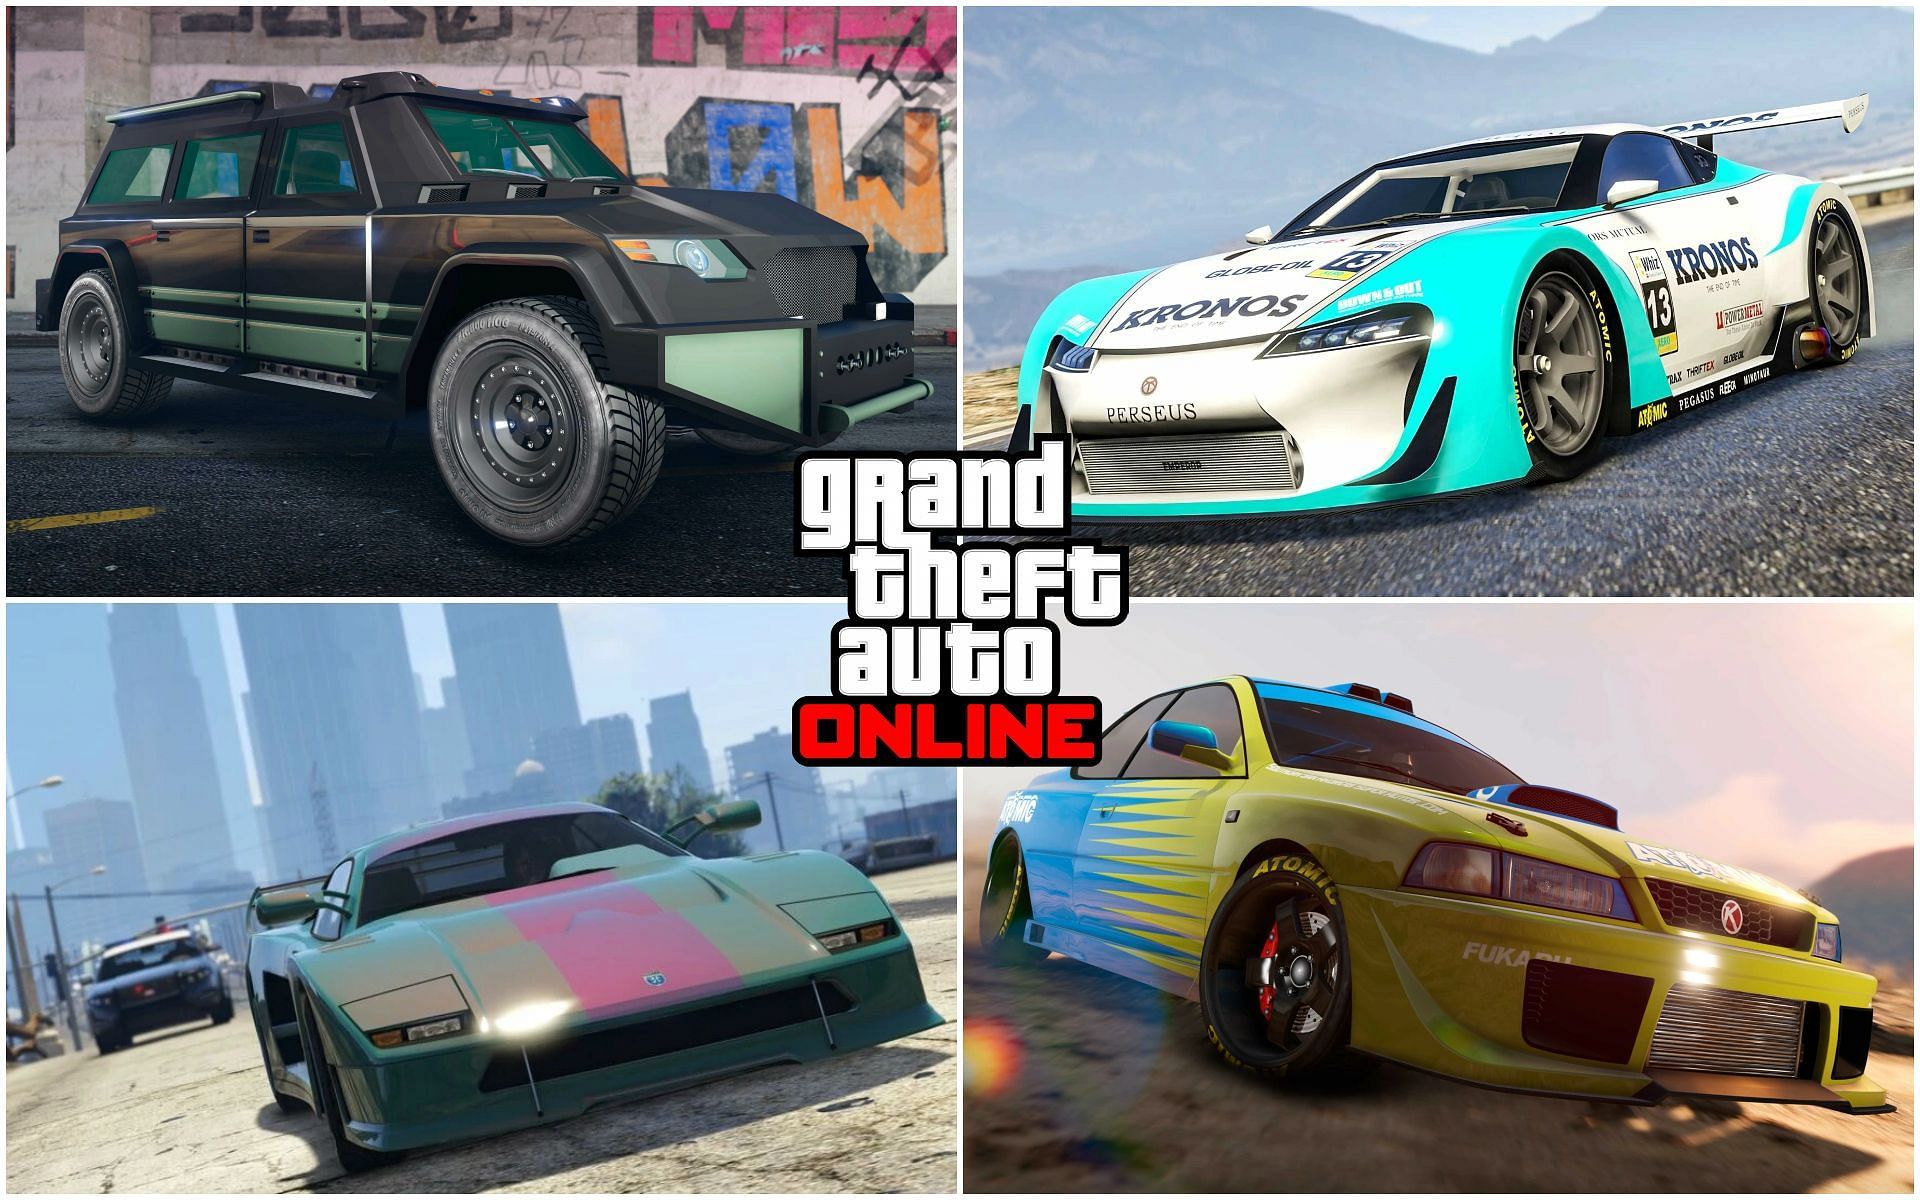 Excellent cars at reasonable prices (Images via Rockstar Games)